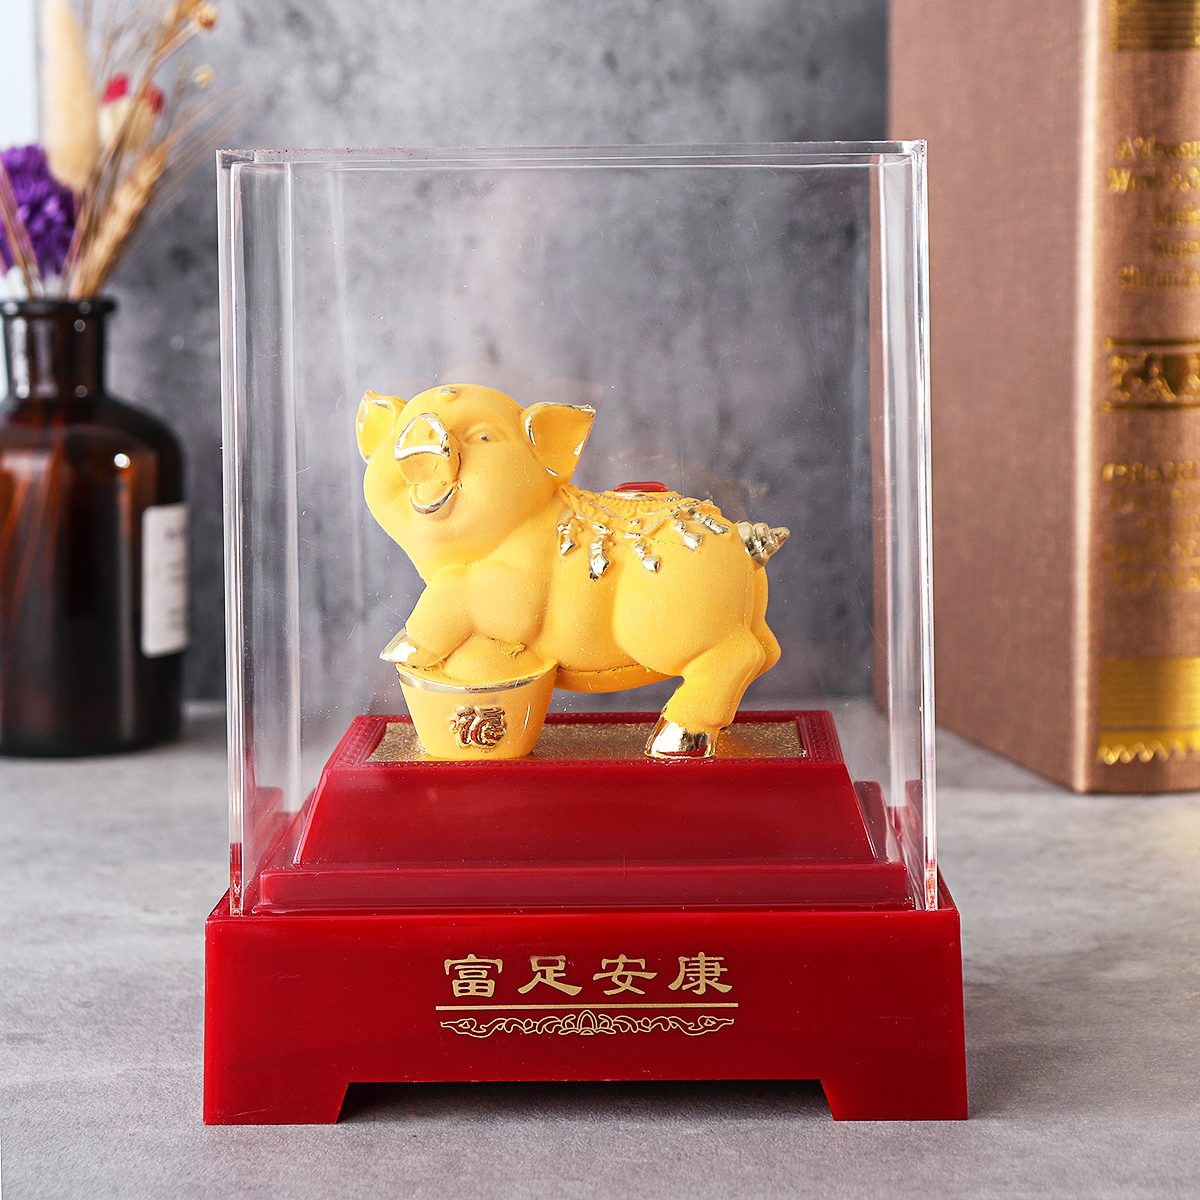 2019-Chinese-Zodiac-Gold-Pig-Money-Wealth-Statue-Office-Home-Decorations-Ornament-Gift-1515810-5